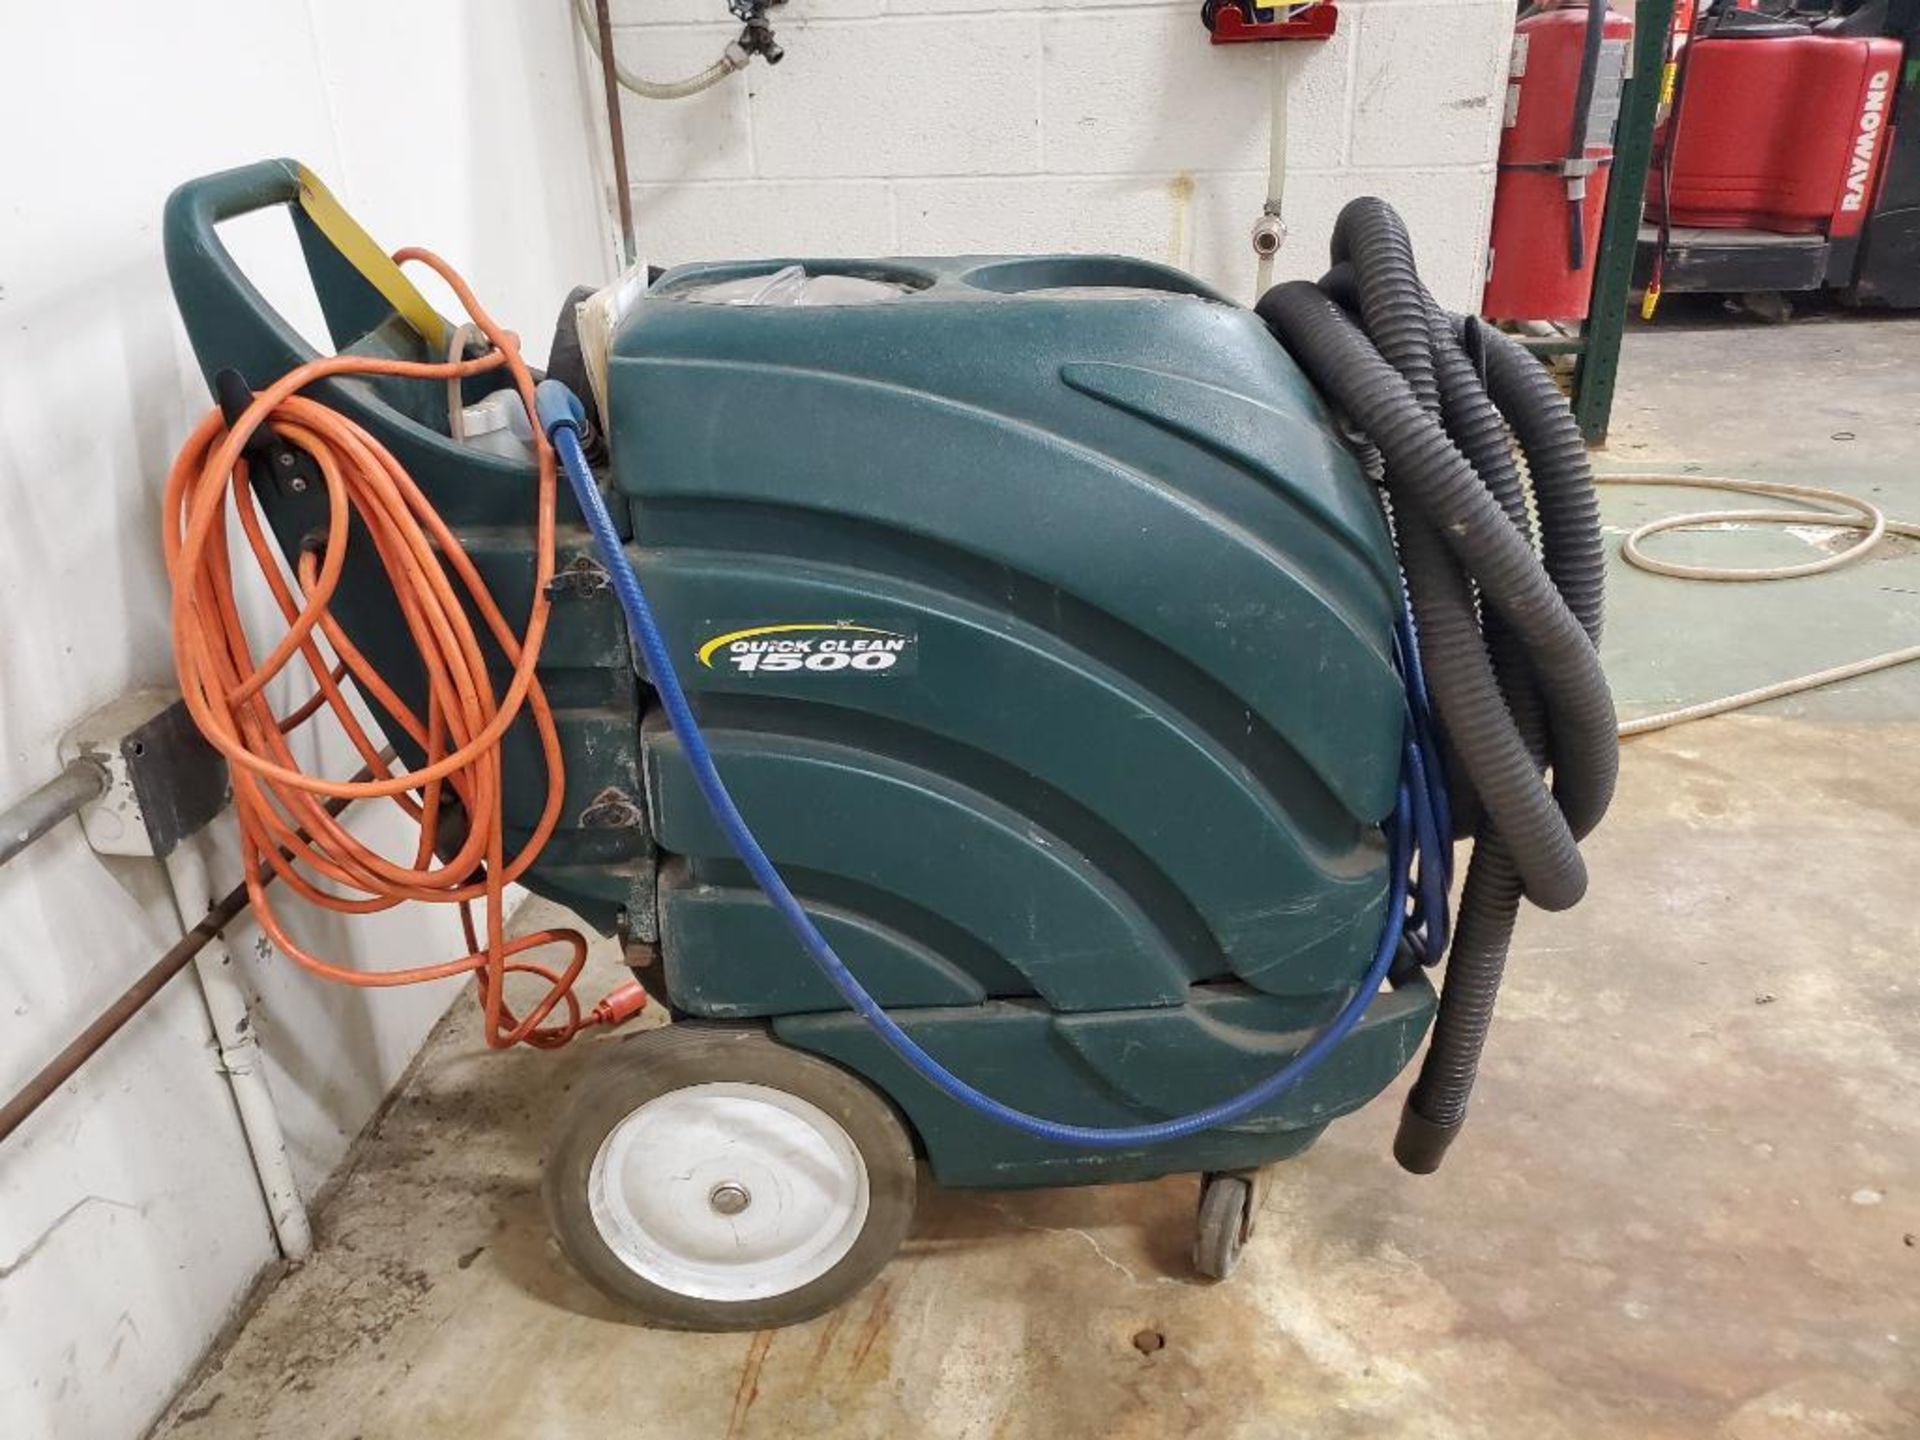 NOBLES QUICK CLEAN 1500 ELECTRIC ALL SURFACE CLEANER ***LOCATED AT 13000 DARICE PARKWAY,